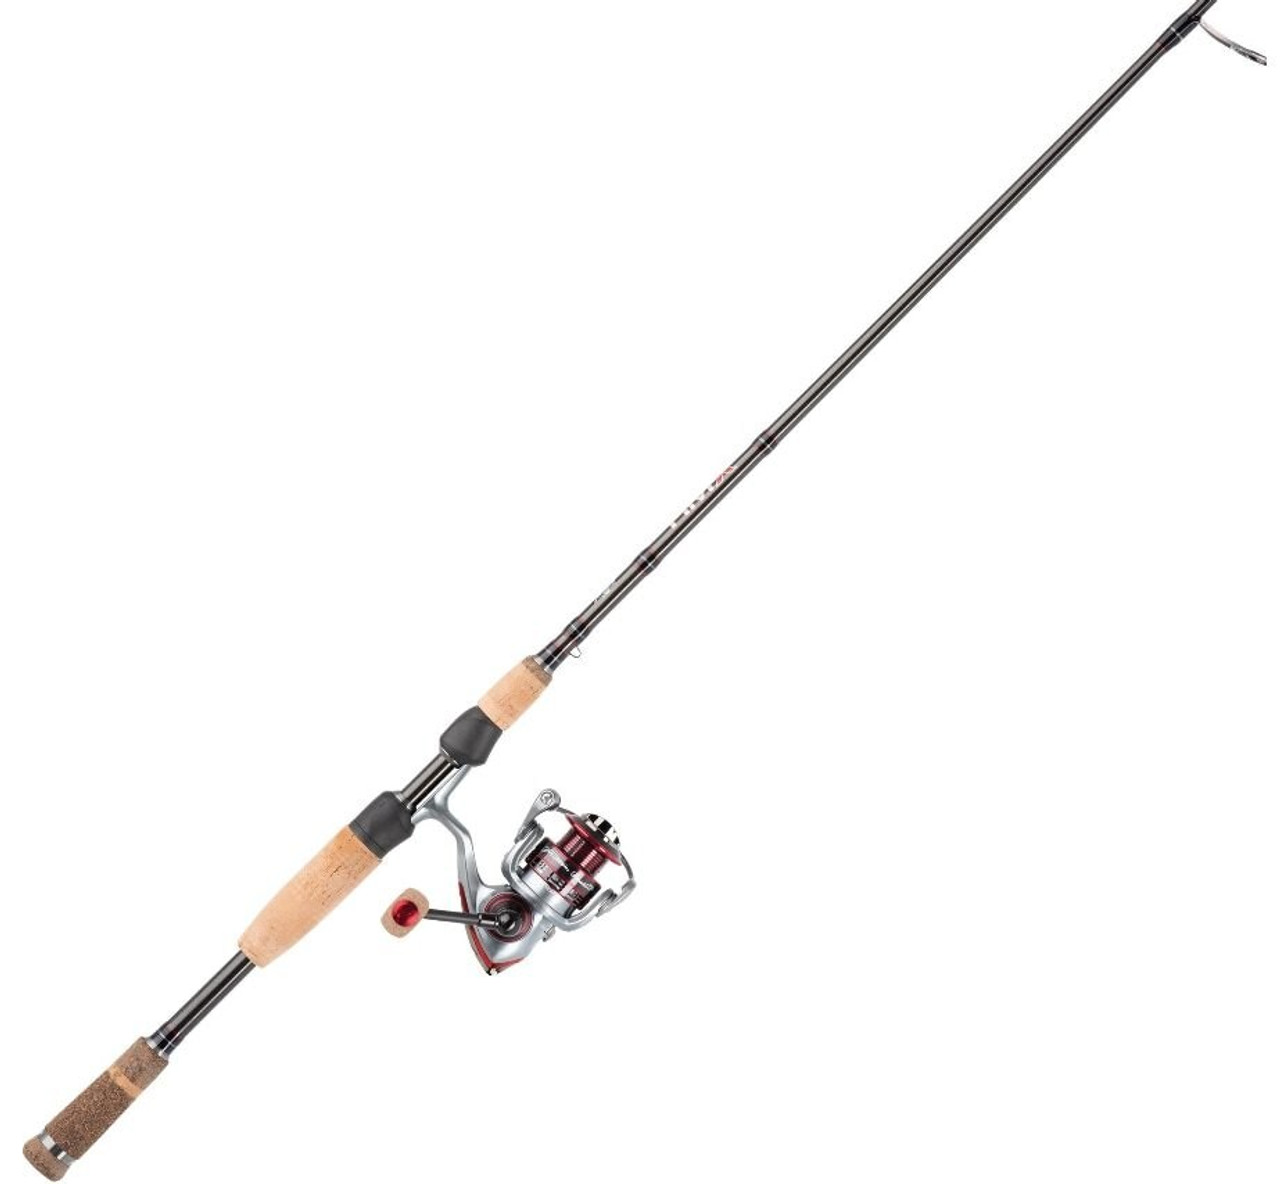 Purchased a Pflueger President Spinning combo- the site said rod